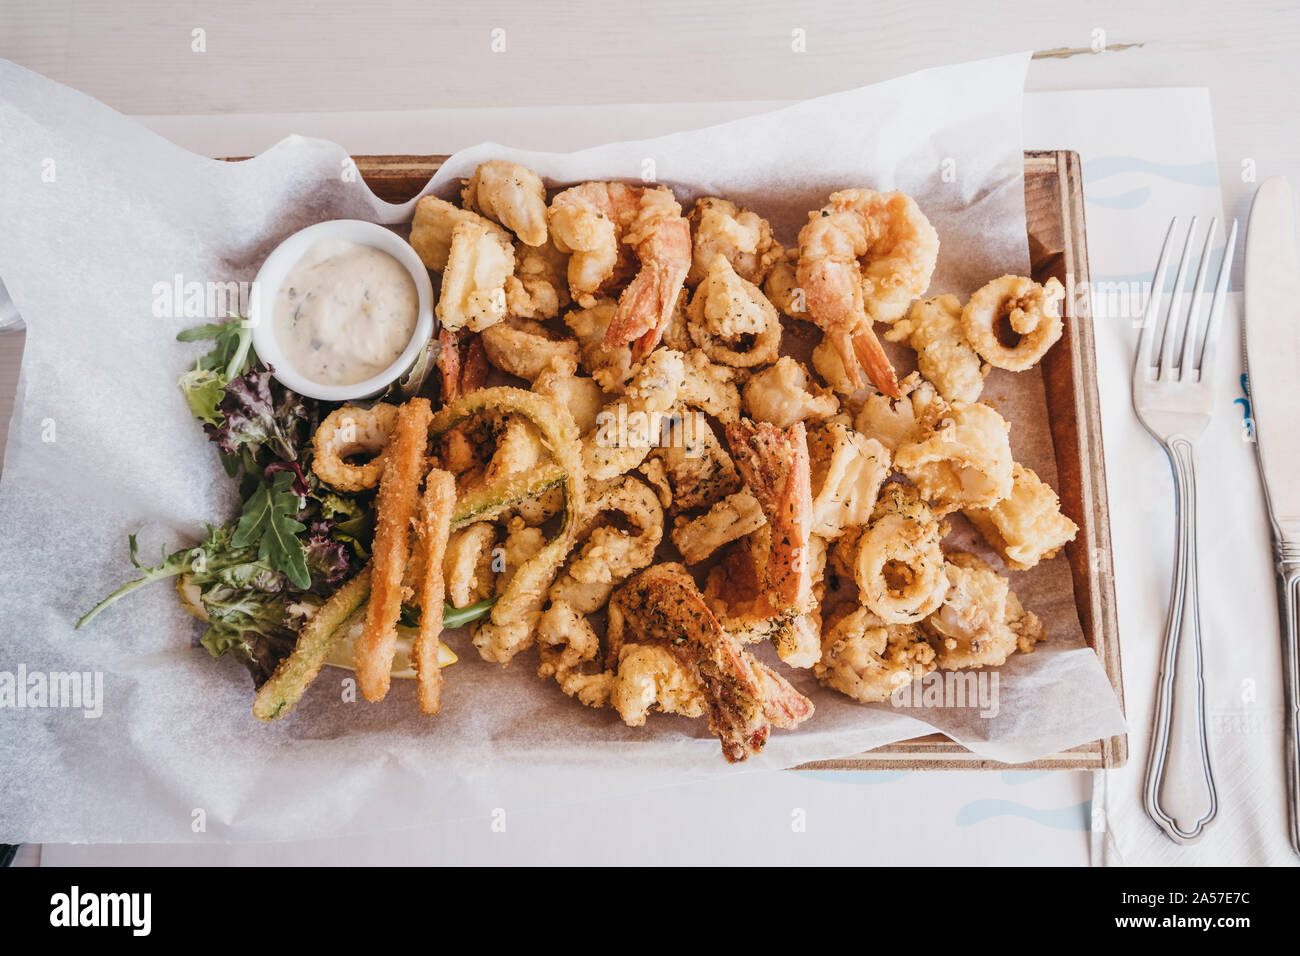 Frito misto (varied battered deep fried seafood) served on a wooden ...